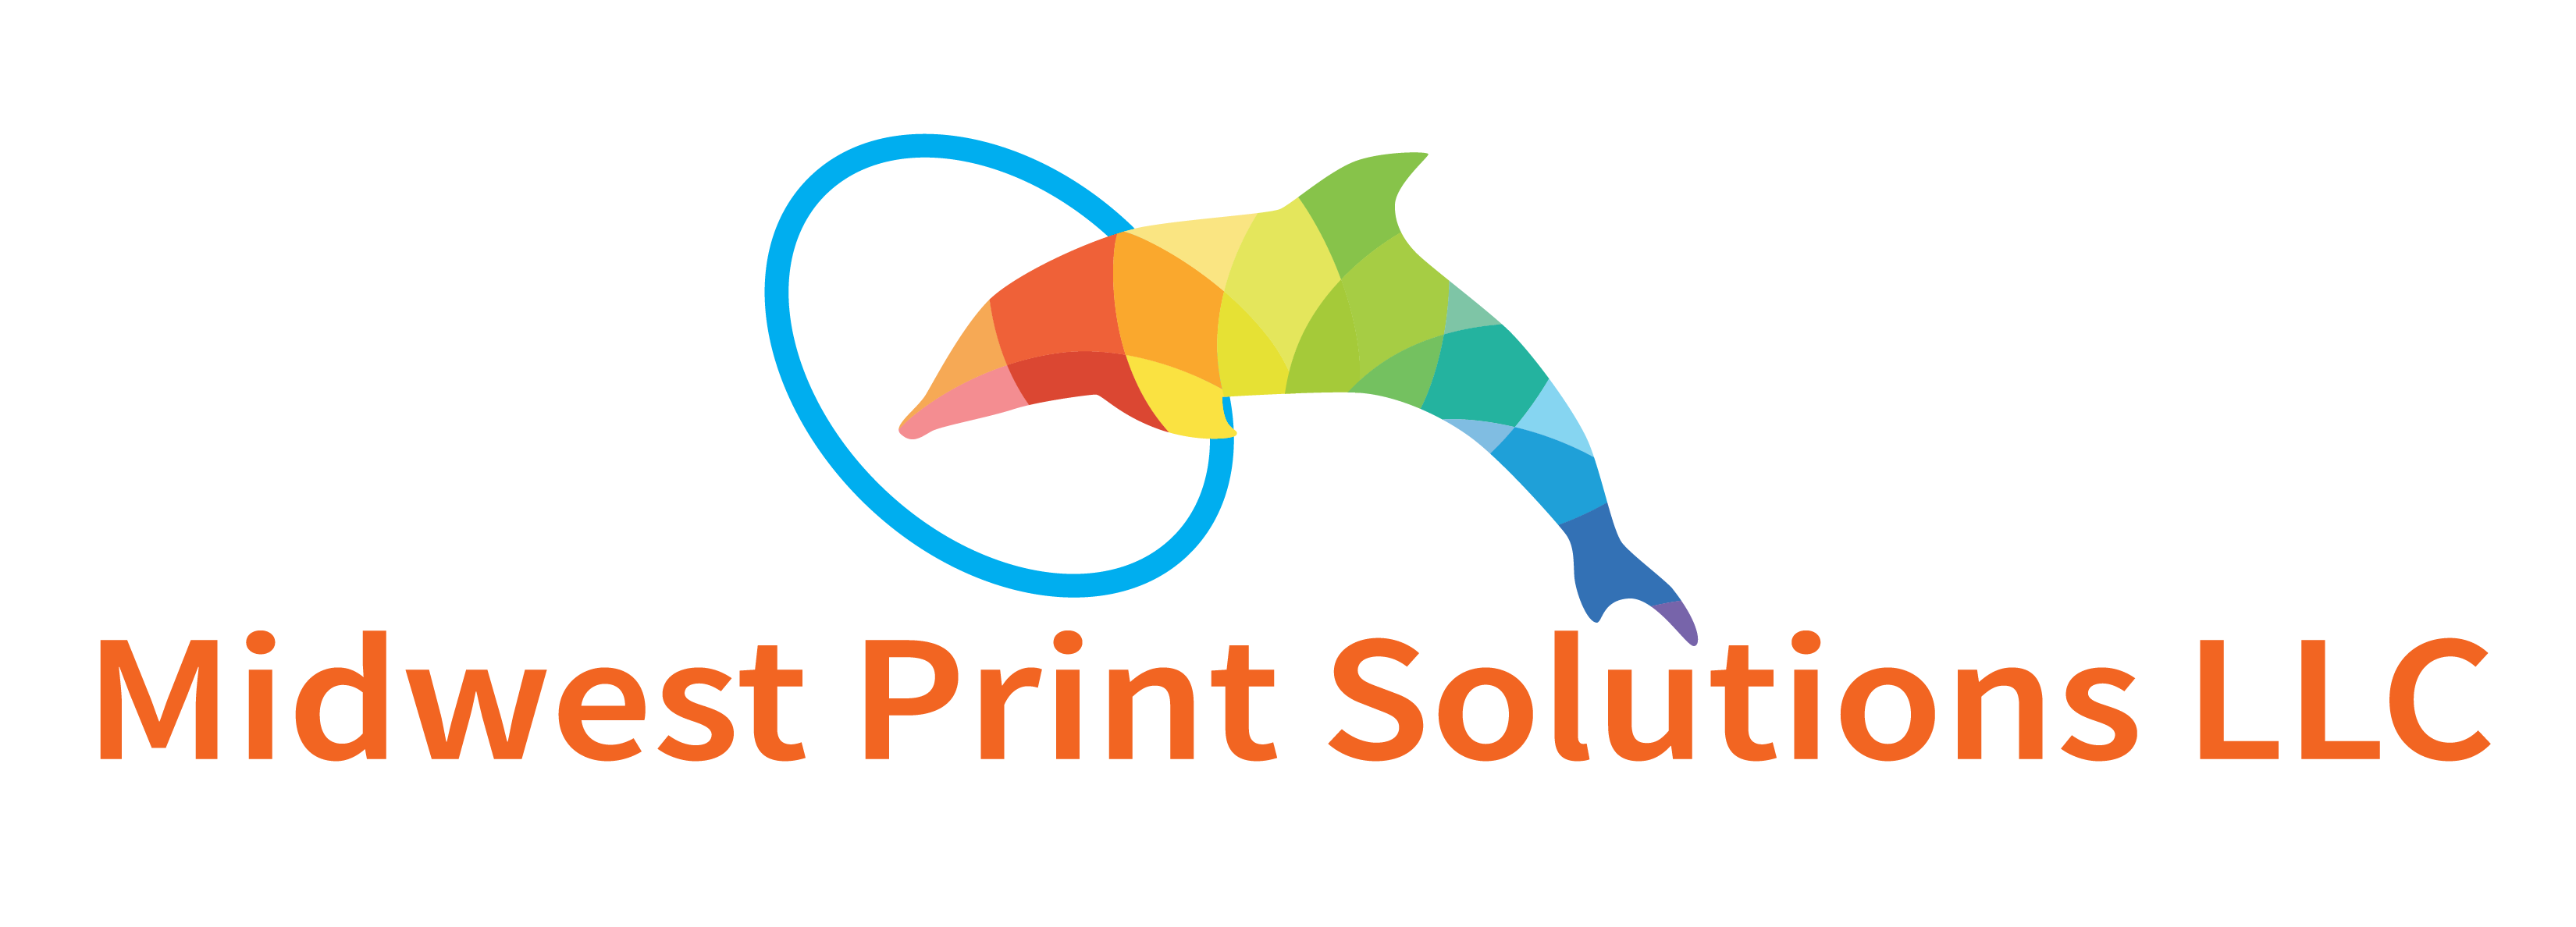 Midwest Print Solutions LLC